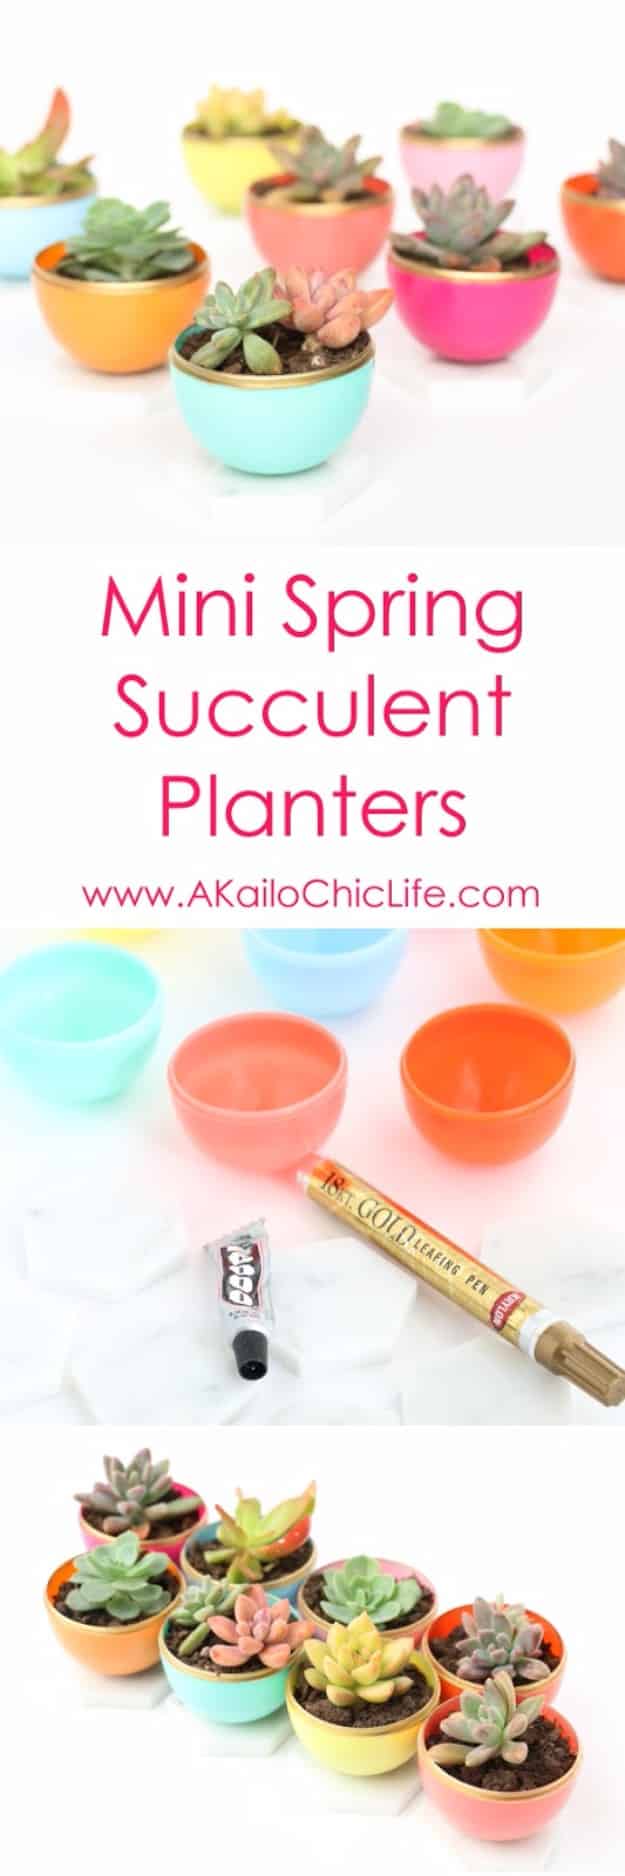 Crafts To Sell Easy - Mini Succulent Planters - How to Make Succulent Planter Step by Step - Creative Cheap DIY Christmas Gift Ideas - Inexpensive Wedding Party Favors for Guests #craftstosell #etsyideas #diy